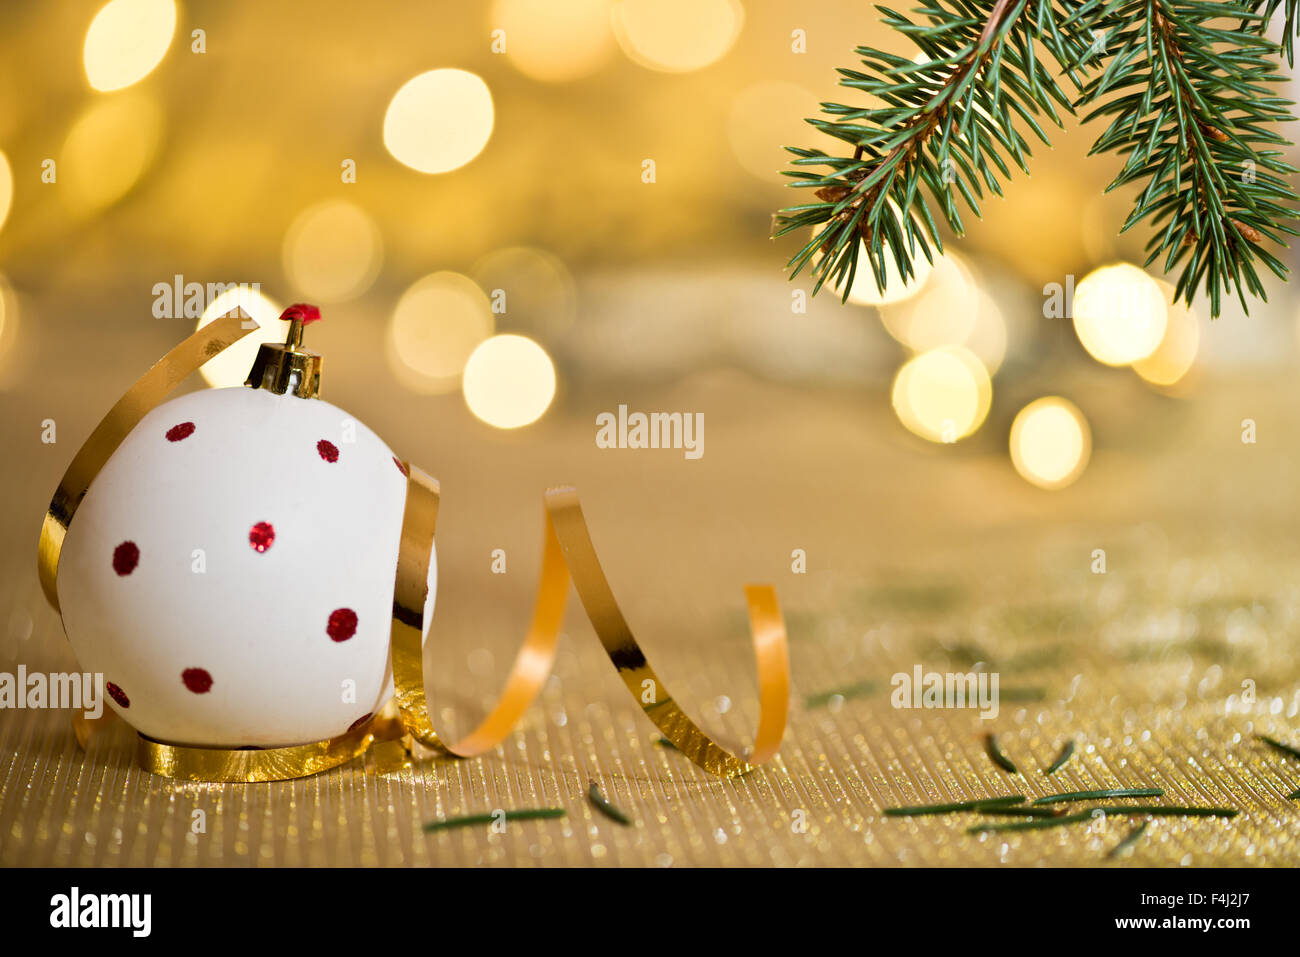 Christmas background with needles and color lights Stock Photo